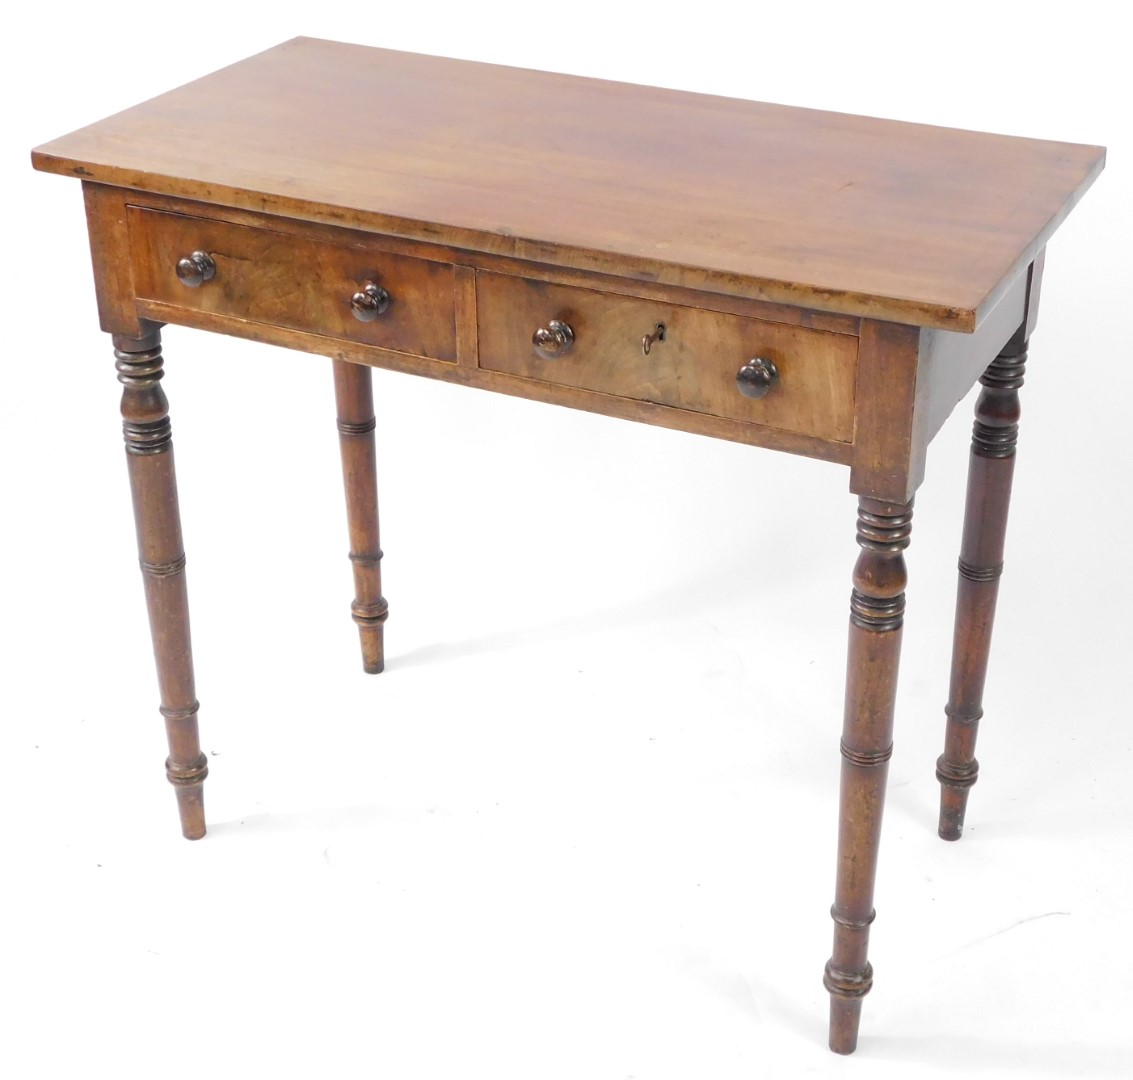 A late Georgian mahogany side table, with two frieze drawers, one lockable, raised on ring turned le